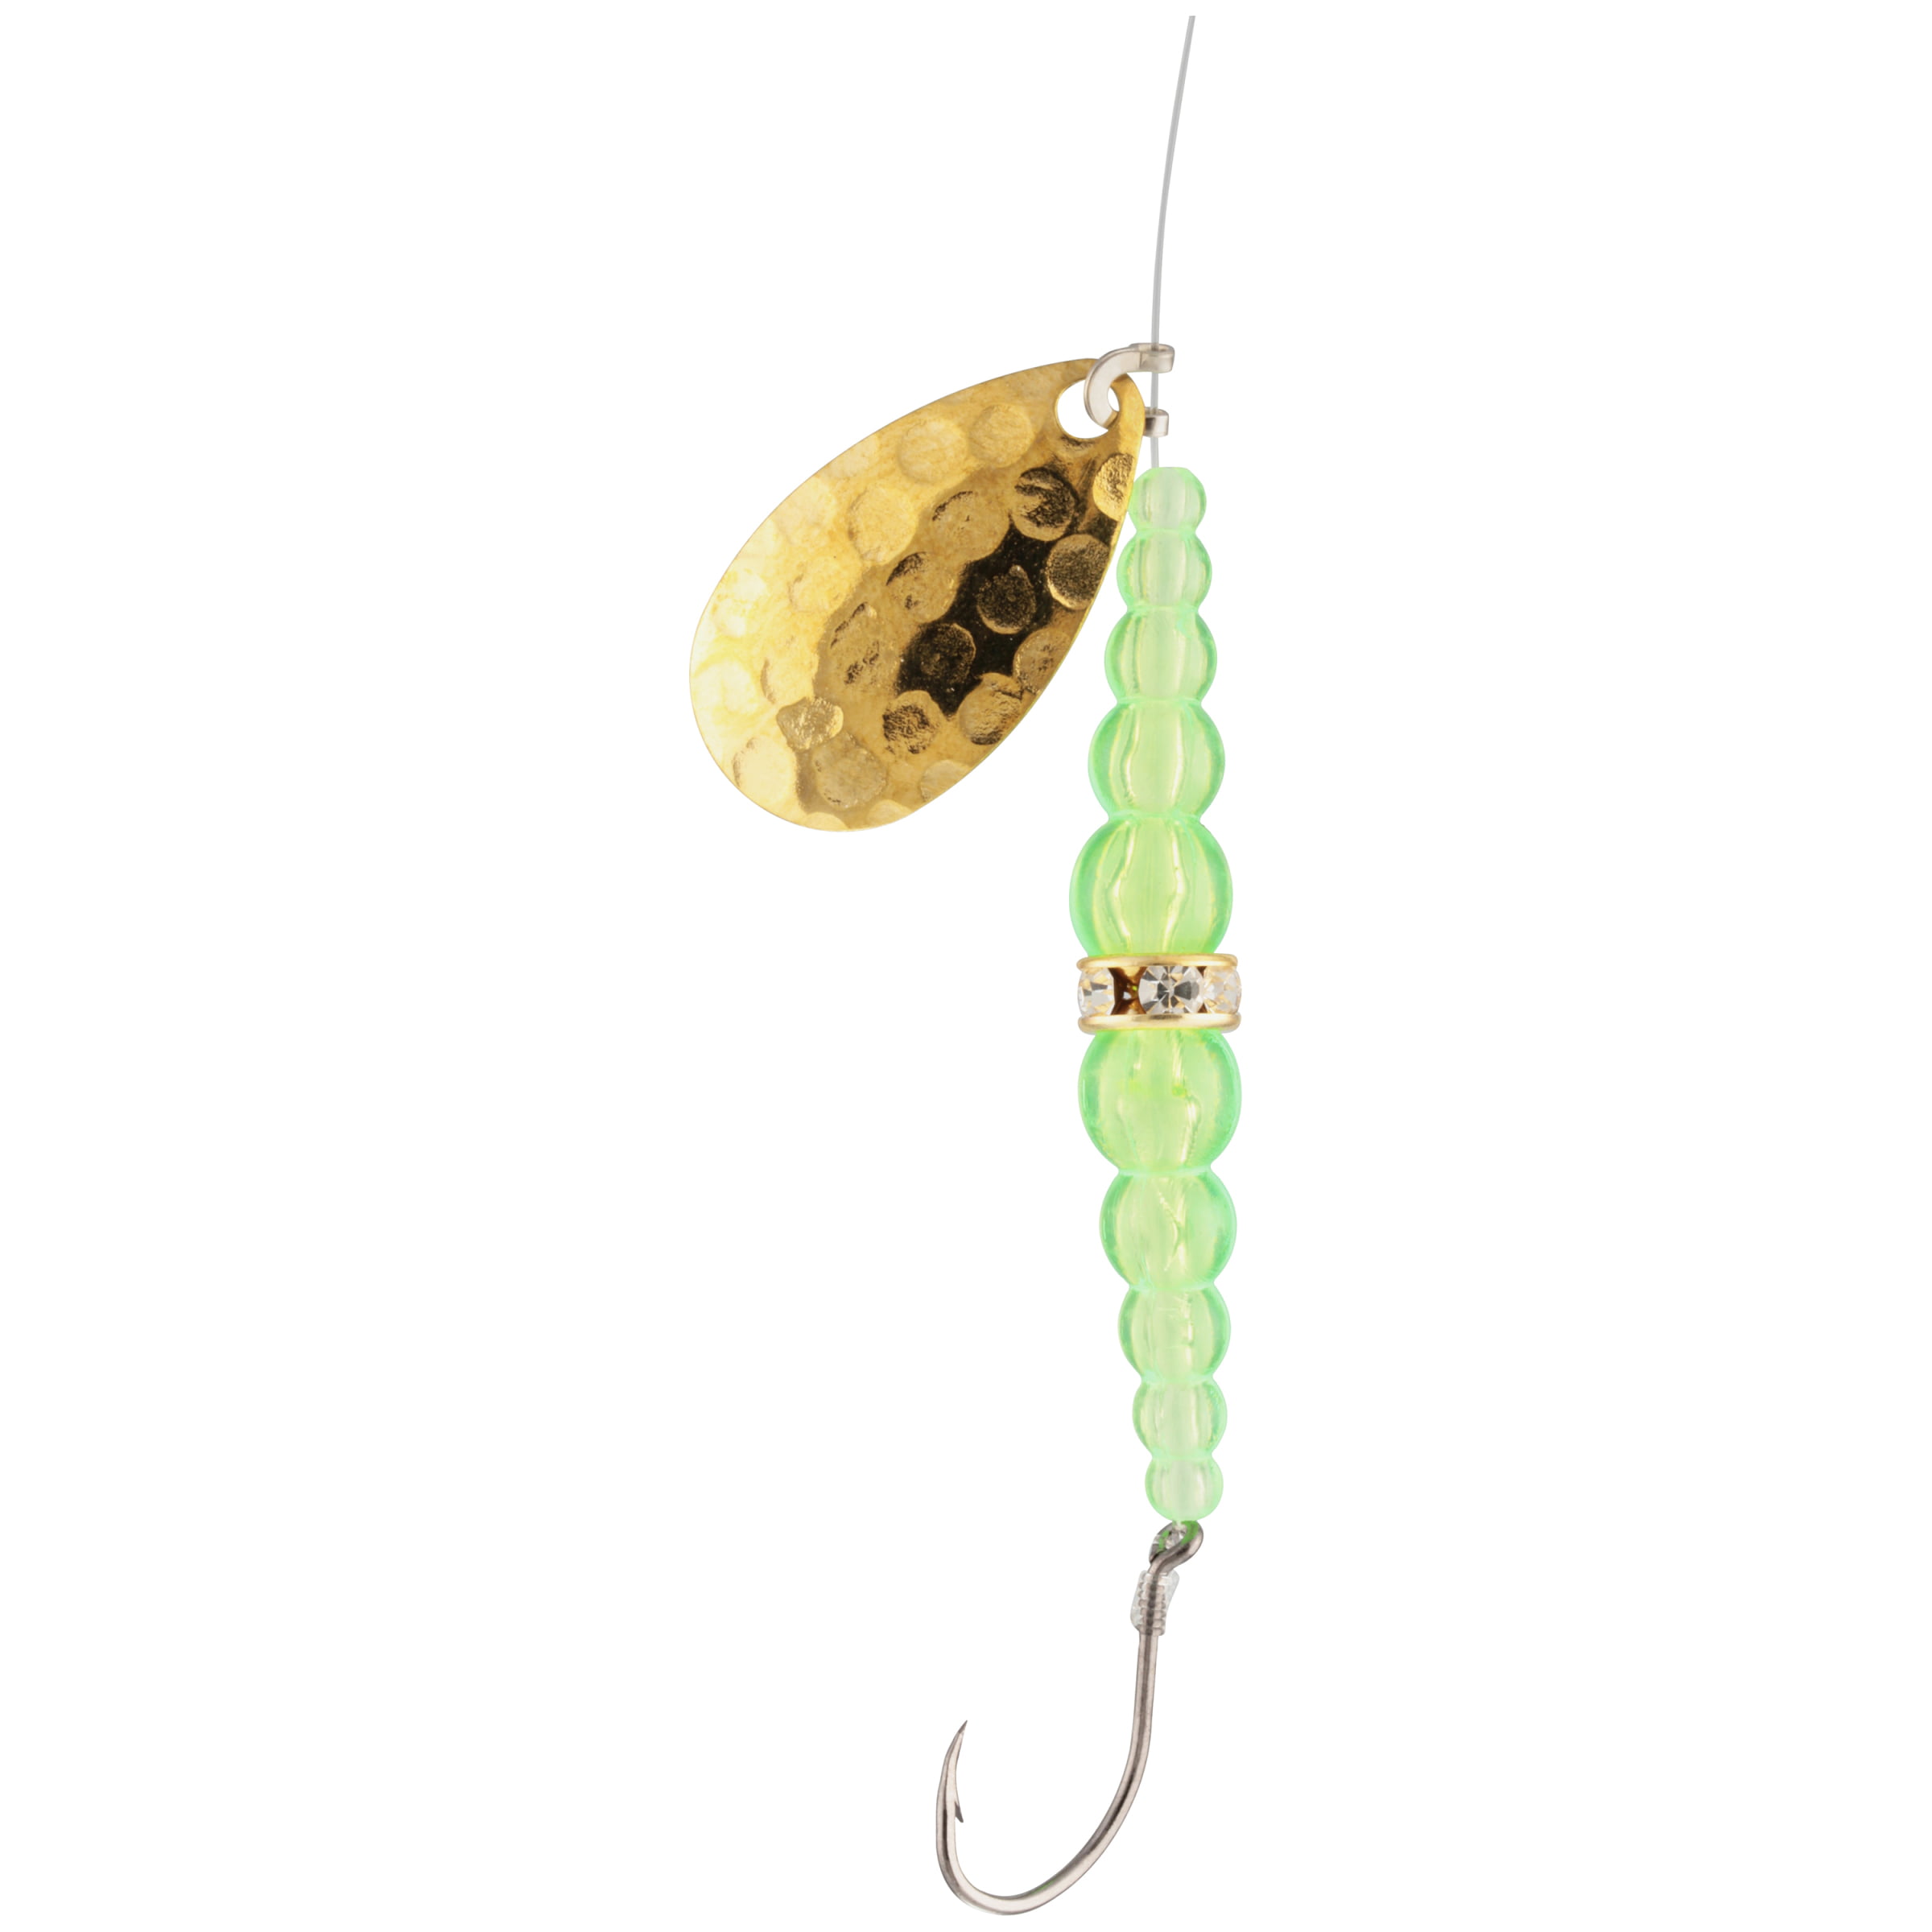 Mack\'s Lure Classic Wedding Ring Fishing Spinnerbait, Flo Chartreuse, Size  6 Hook, Spinnerbaits